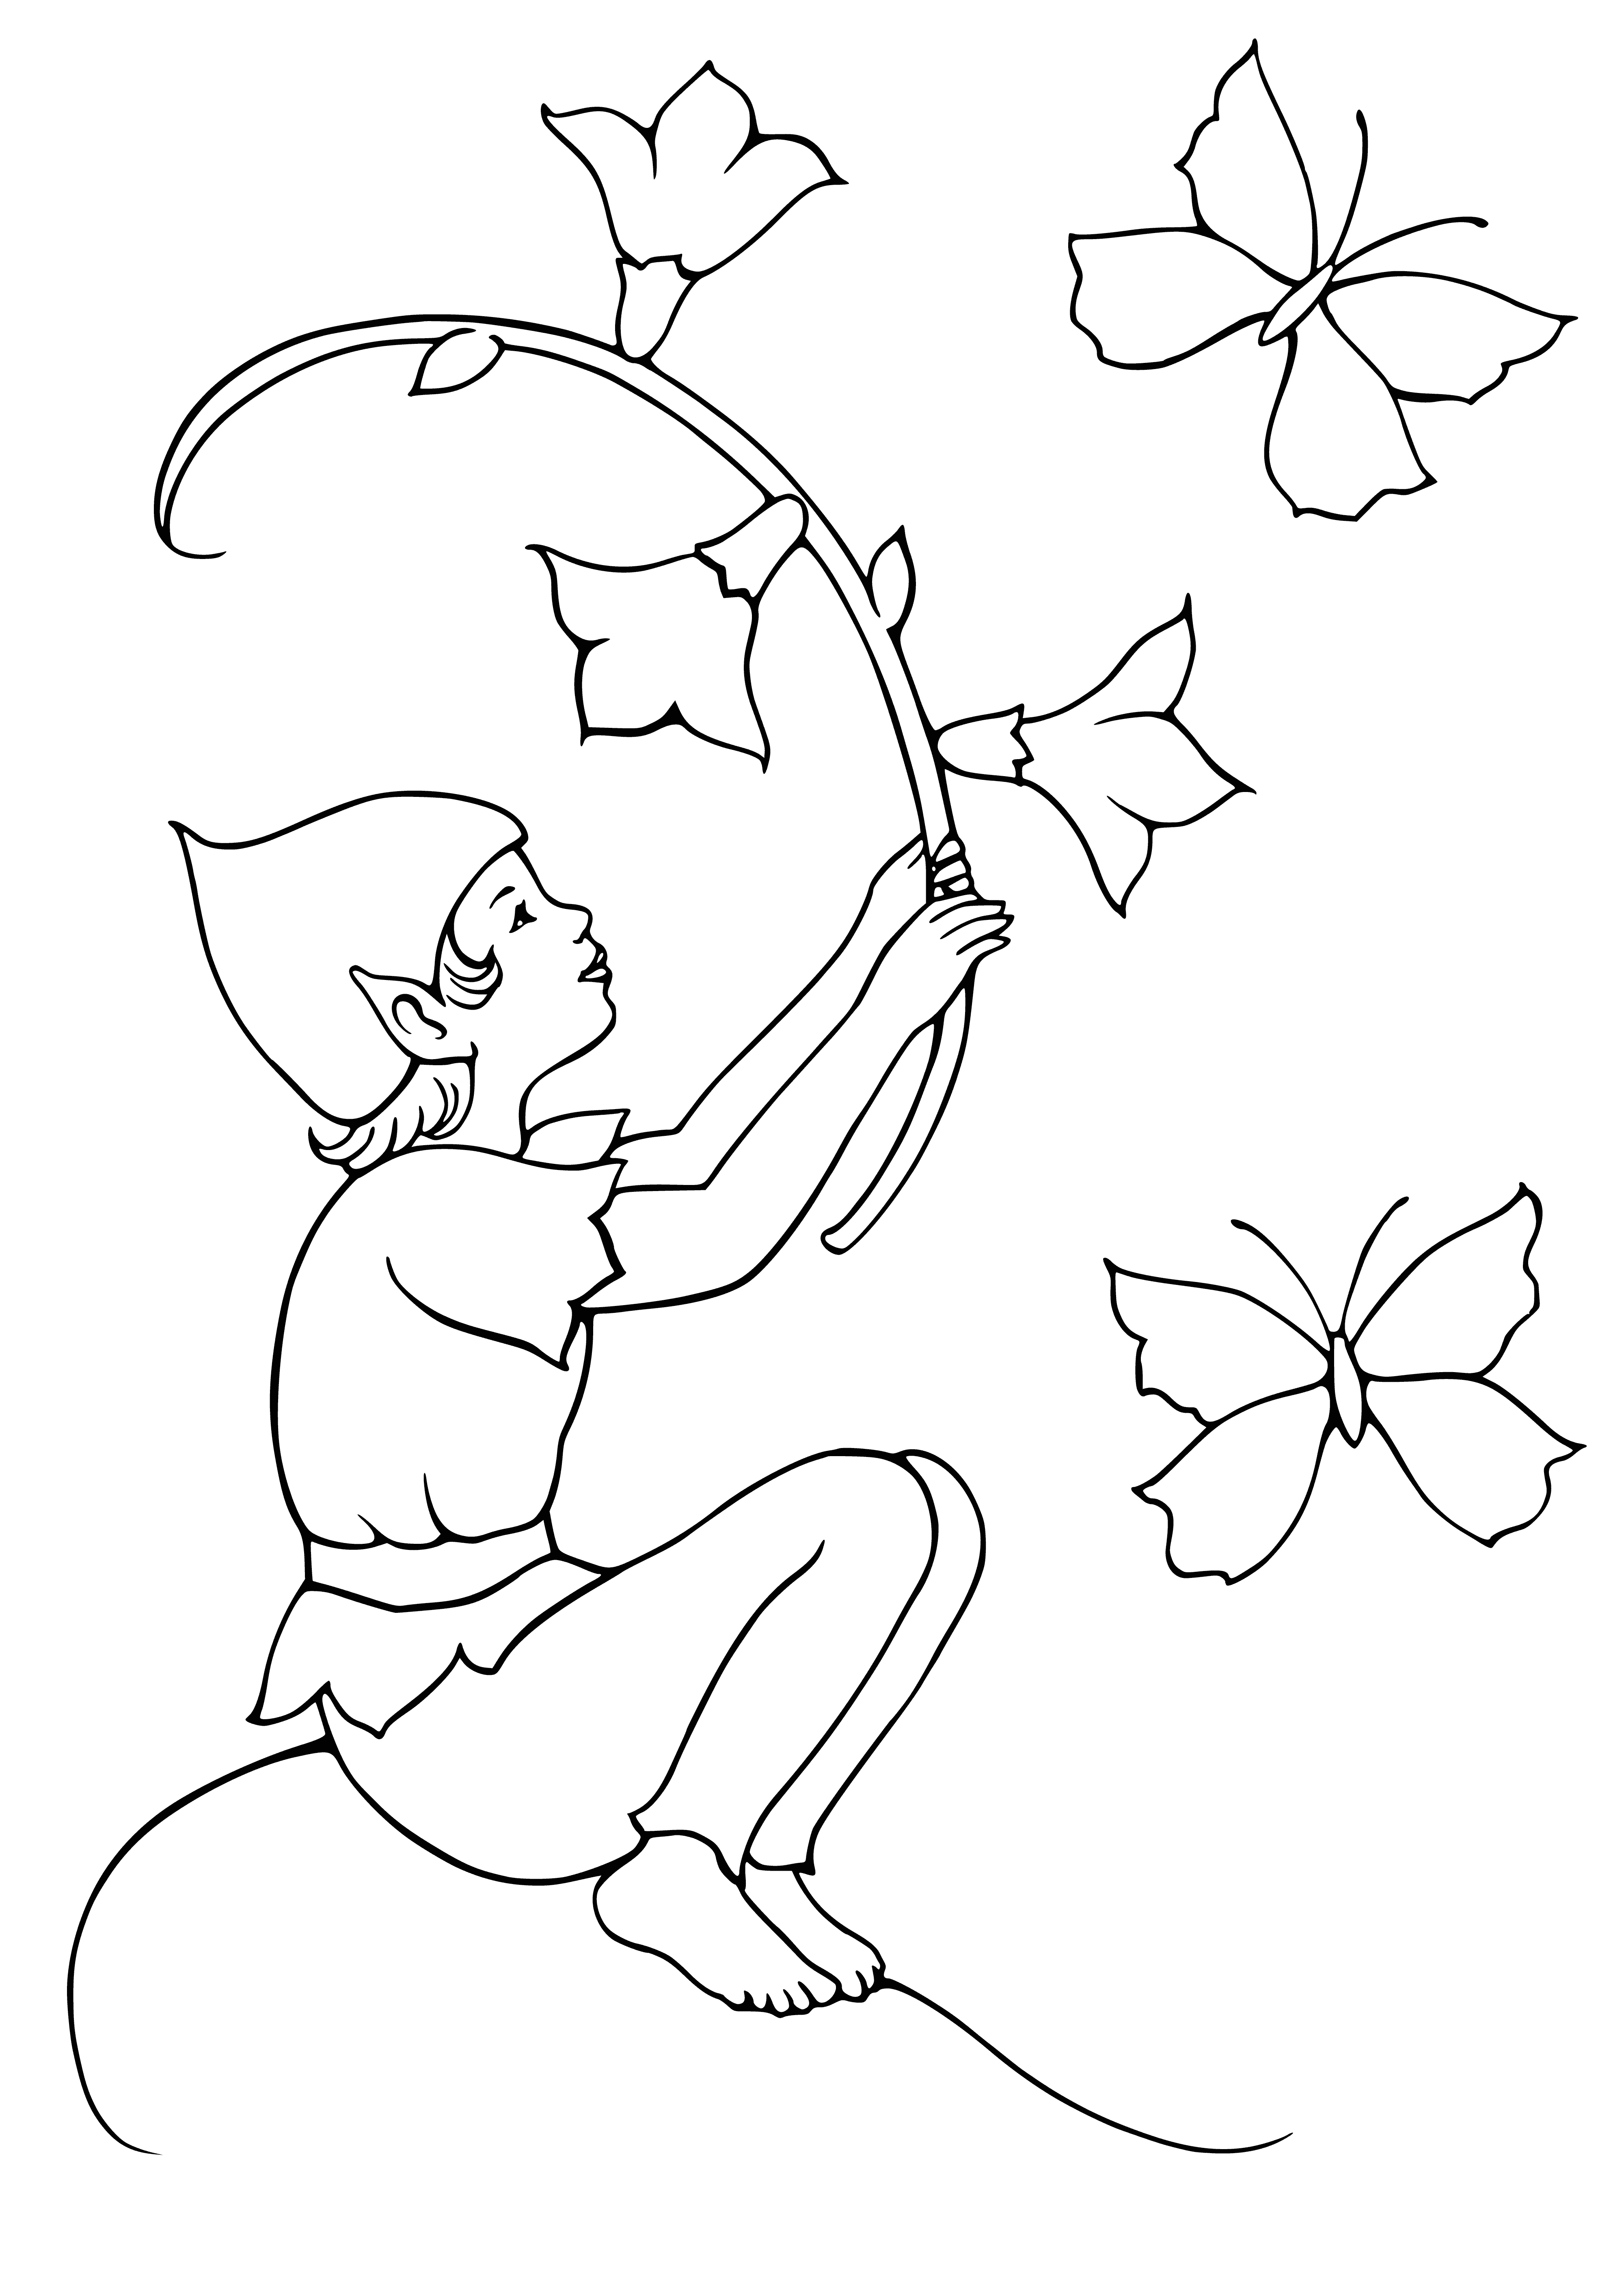 Elf playing with bells coloring page